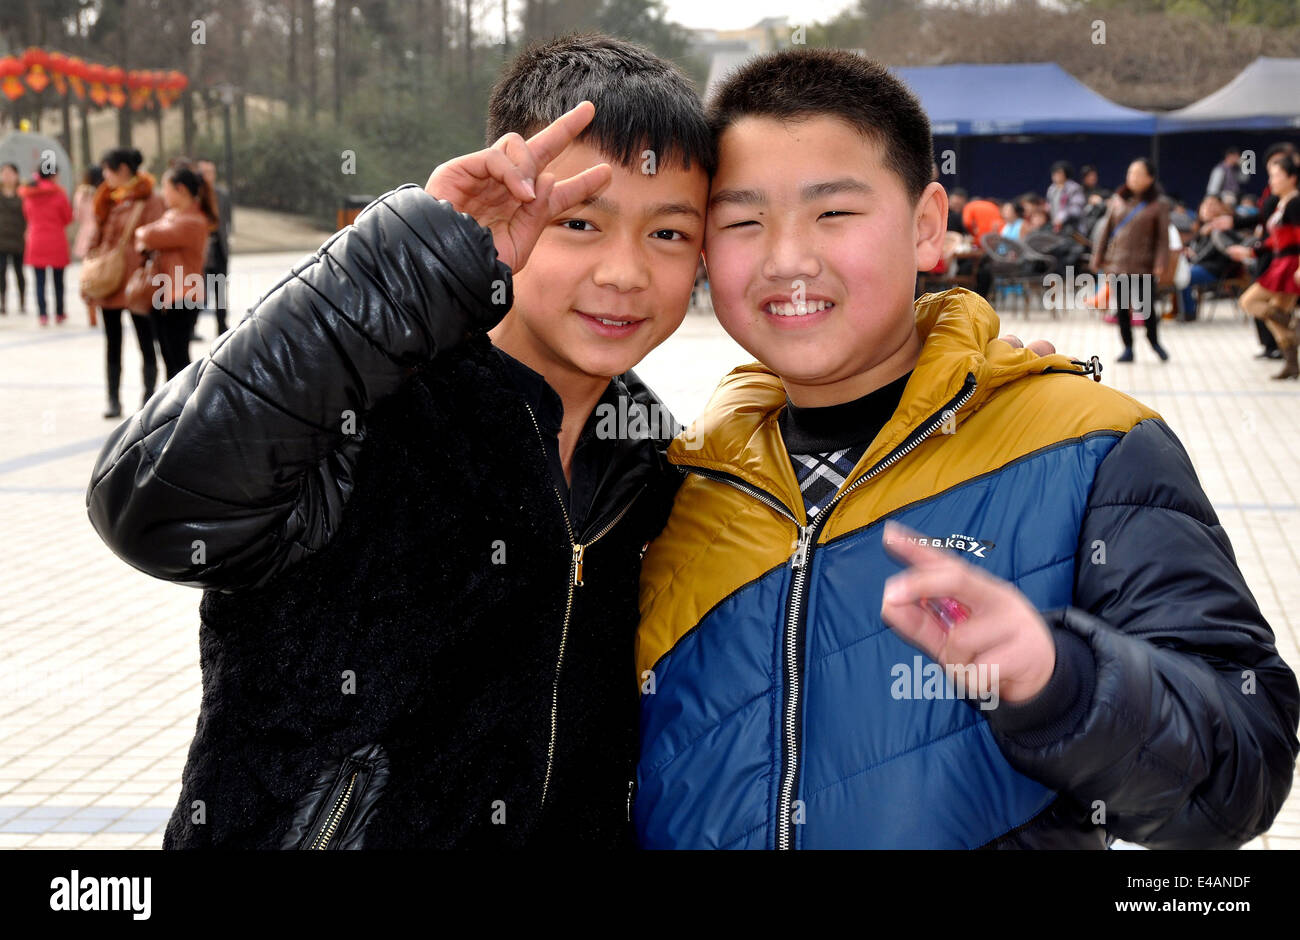 Pengzhou, China: Two young Chinese boys flash the V sign in the plaza at Pengzhou City Park Stock Photo